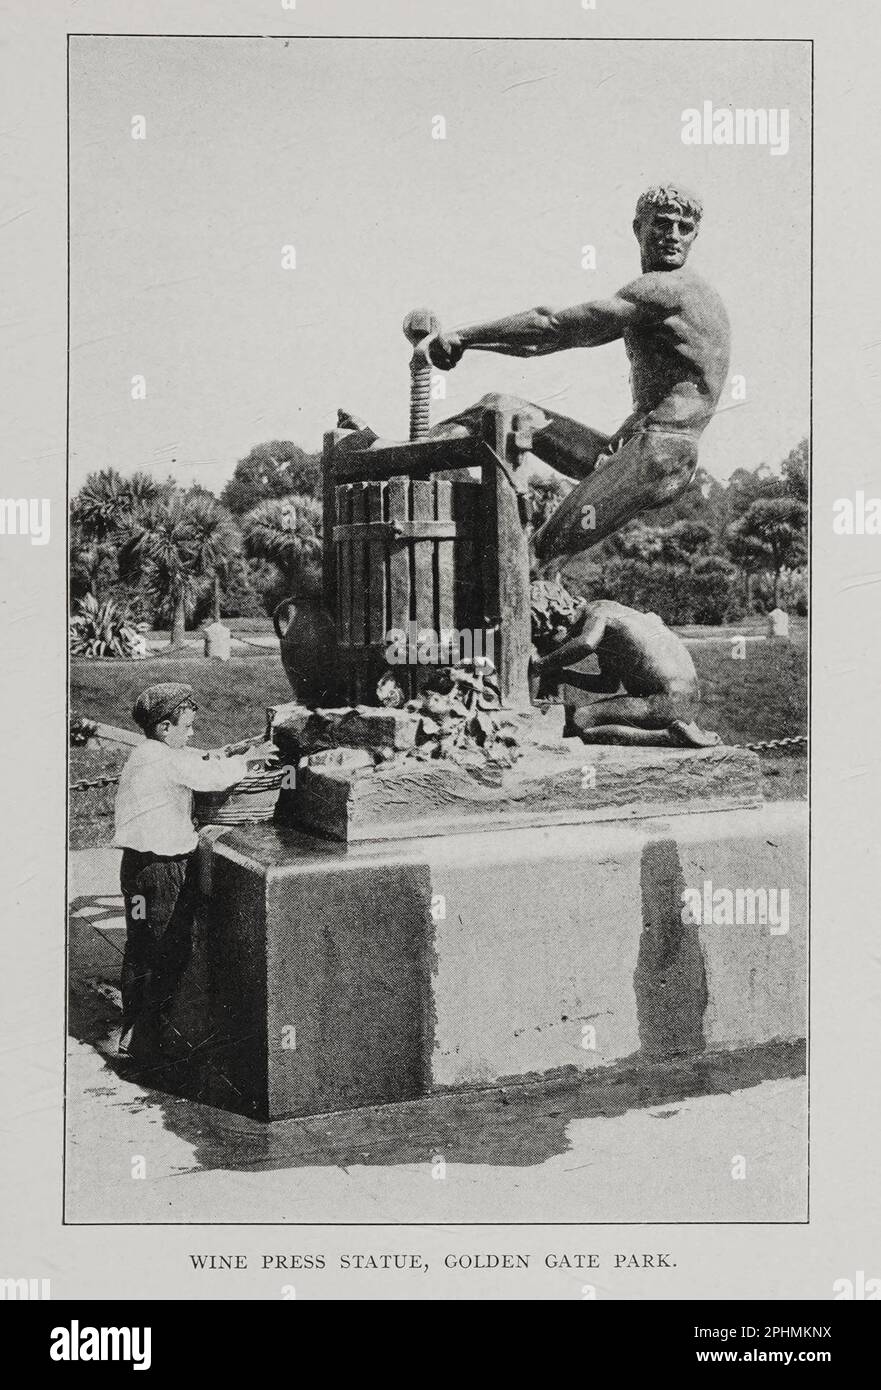 Wine Press Statue, Golden Gate Park from the book ' california, romantic and beautiful ' by George Wharton James Publication date 1914 Publisher the page company Stock Photo